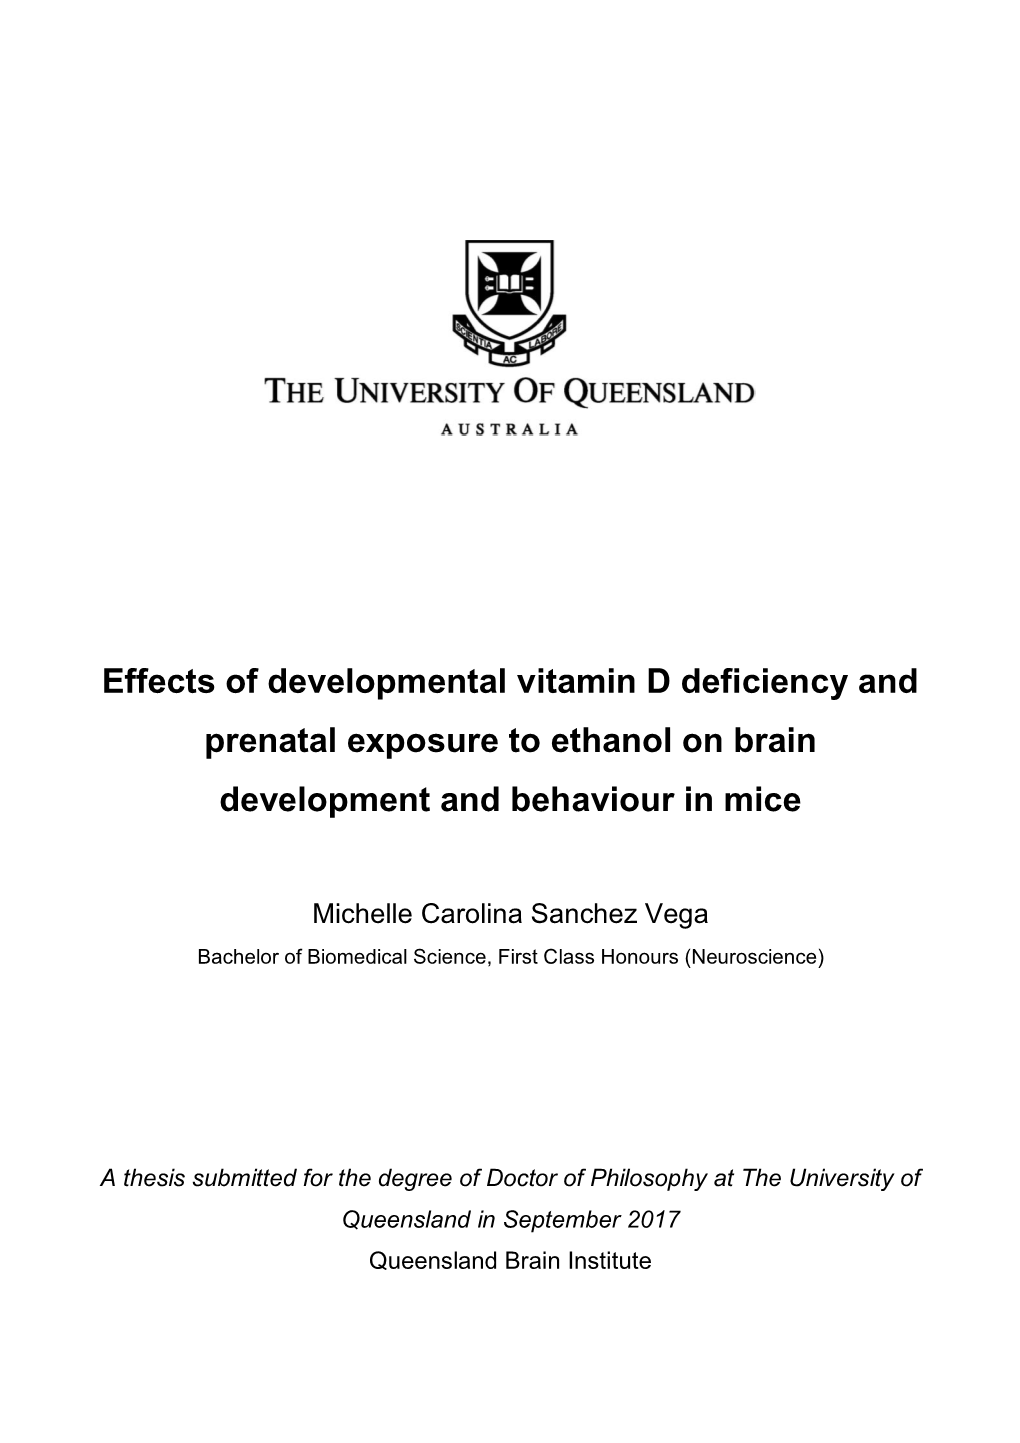 Effects of Developmental Vitamin D Deficiency and Prenatal Exposure to Ethanol on Brain Development and Behaviour in Mice